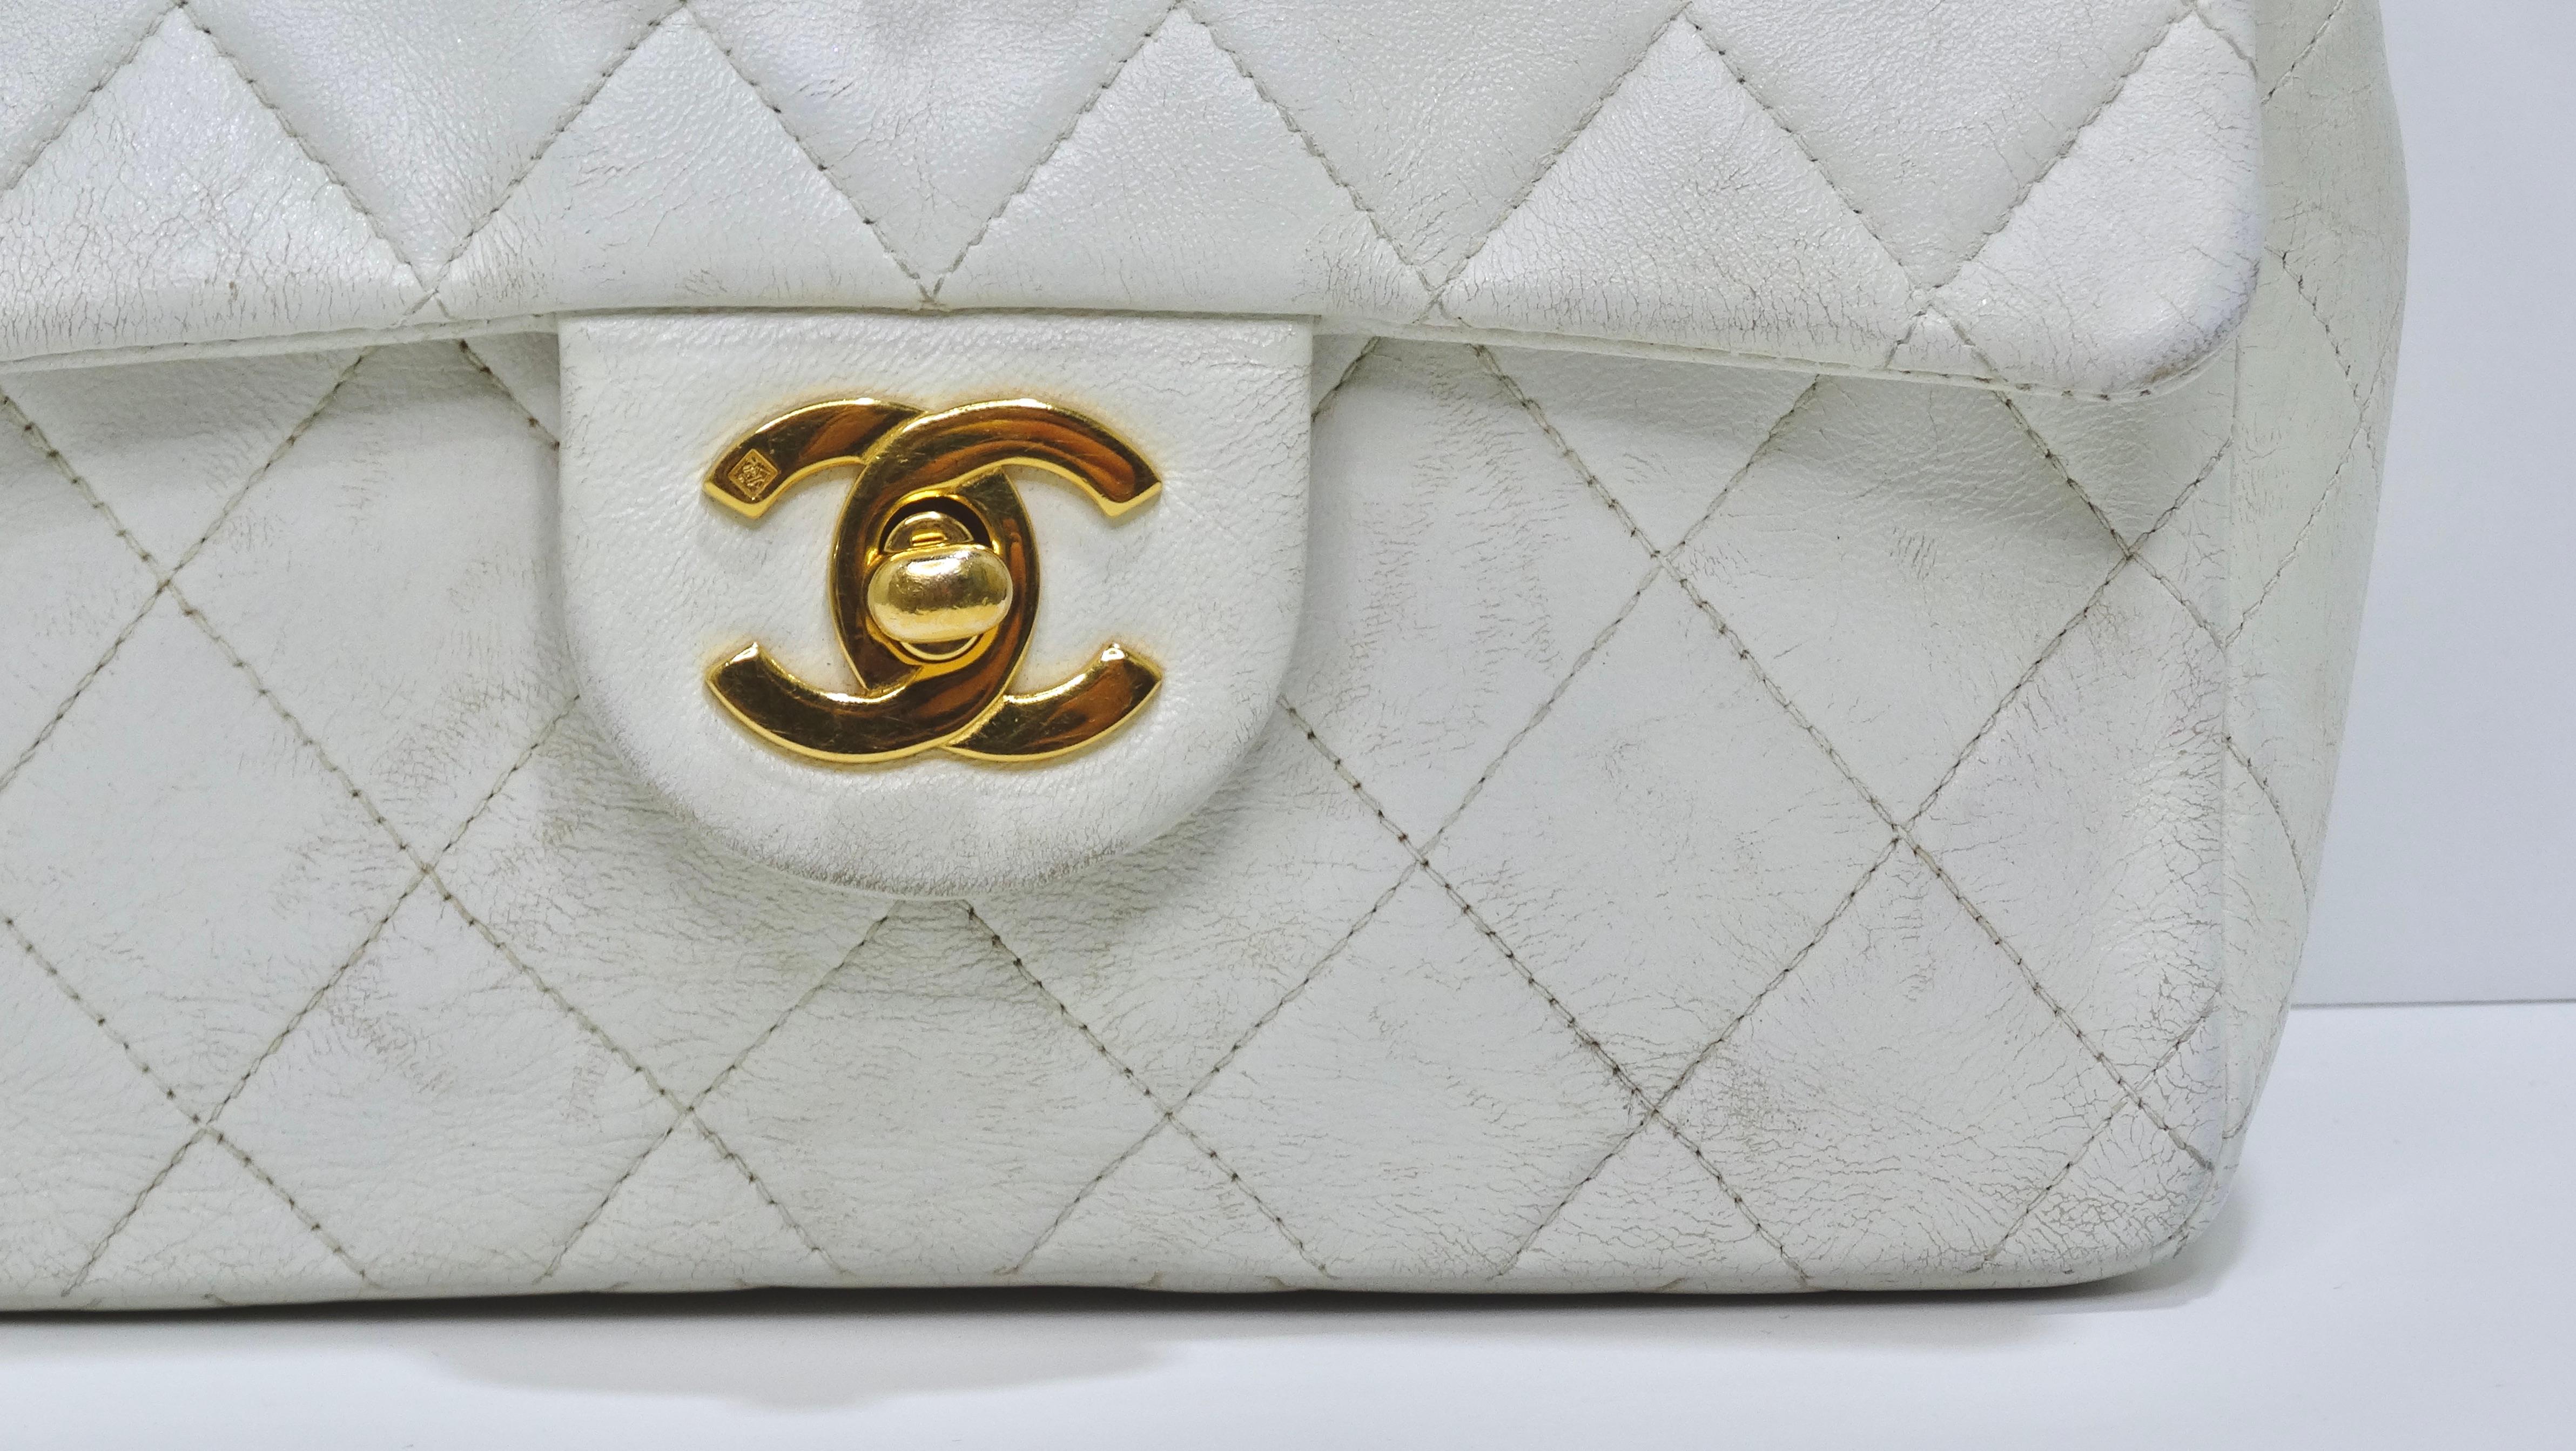 You can't go wrong with this adorable and versatile Chanel crossbody bag! This is a vintage Chanel find that dates back to the mid-1990's. This bag is featured in a soft white leather in a mini size with a square shape. It has gold-tones hardware,